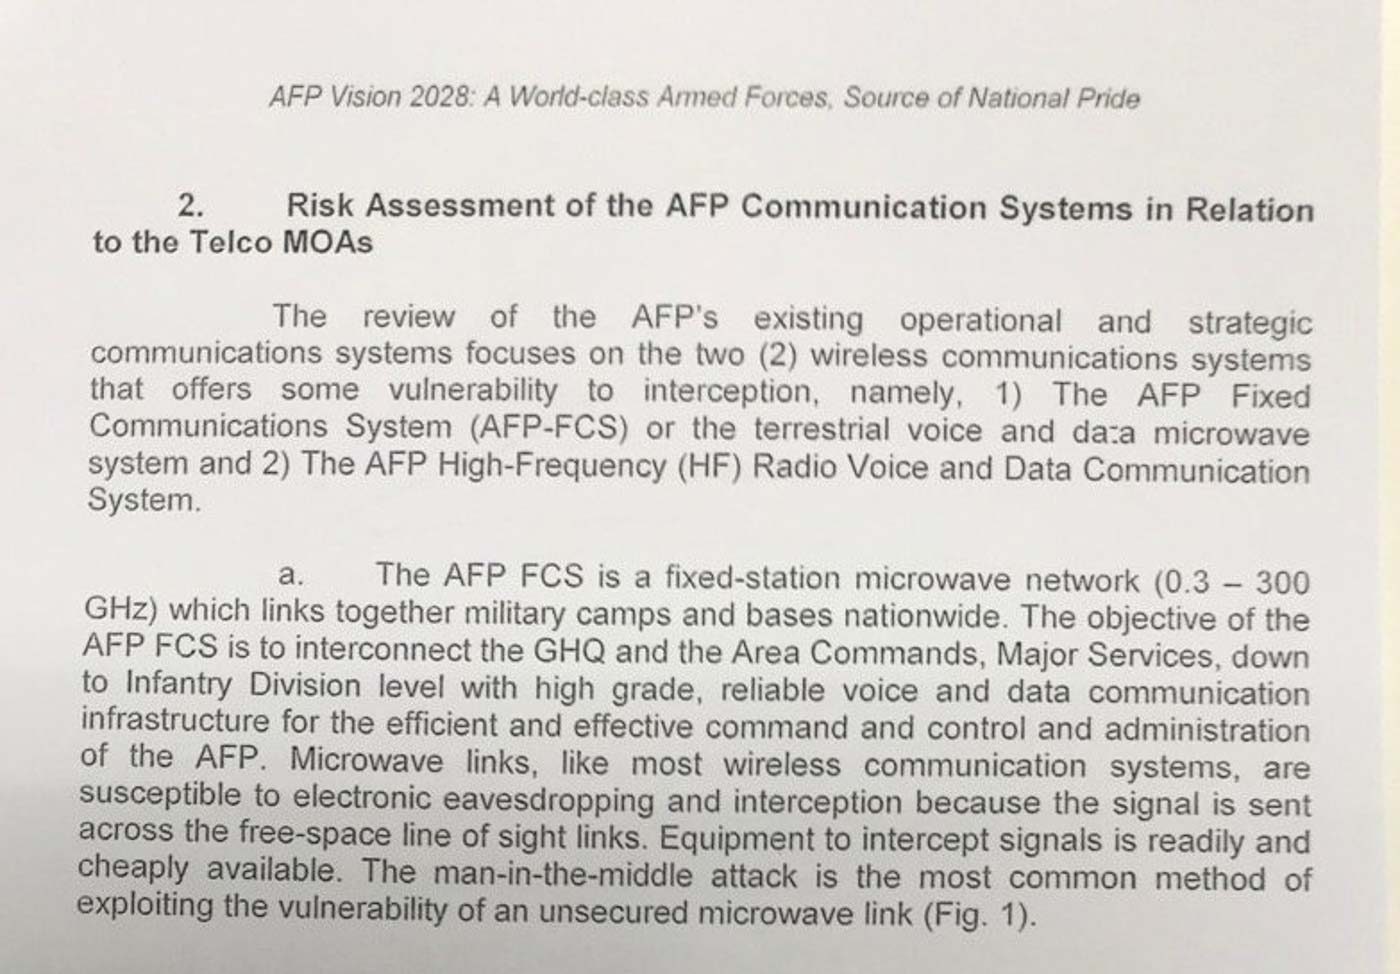 CELL SITES. The presence of commercial telecommunication towers inside AFP properties heightens vulnerabilities in the military's communication systems. Photo sourced by Rappler 